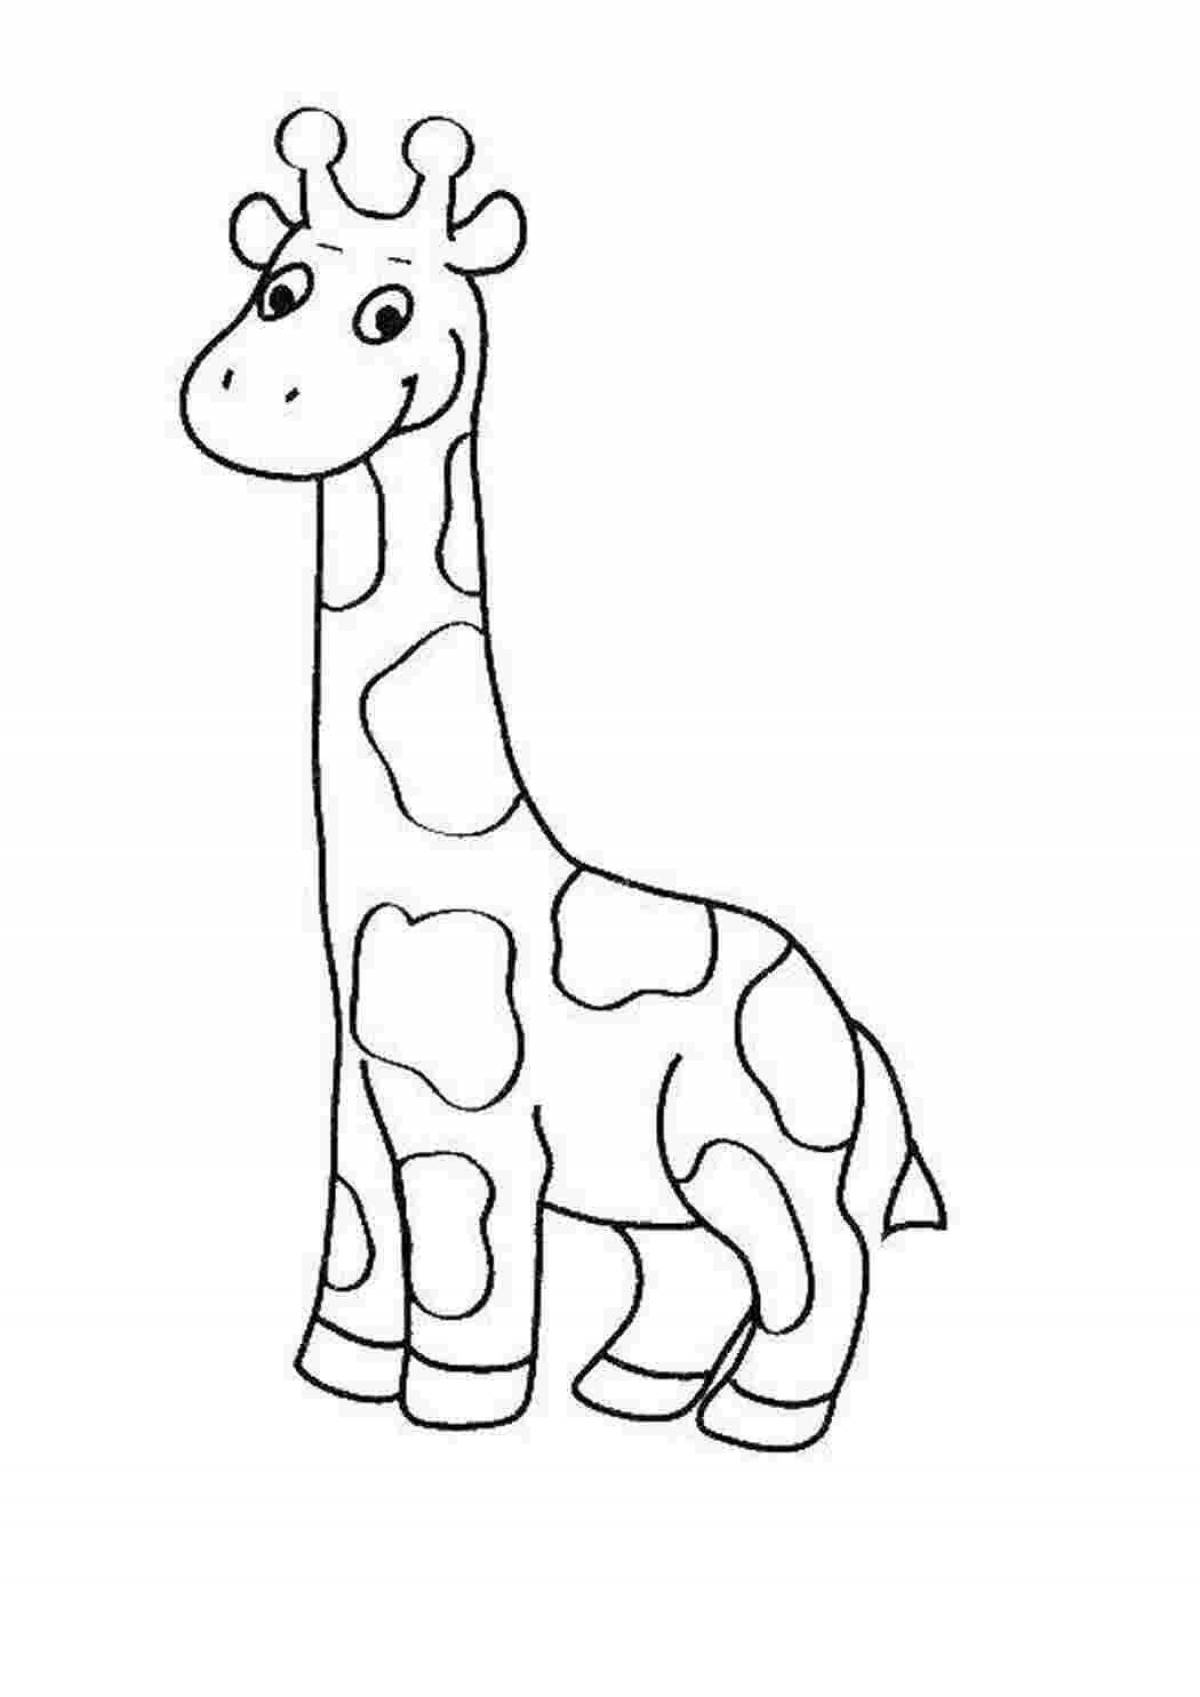 Animated giraffe coloring page for kids